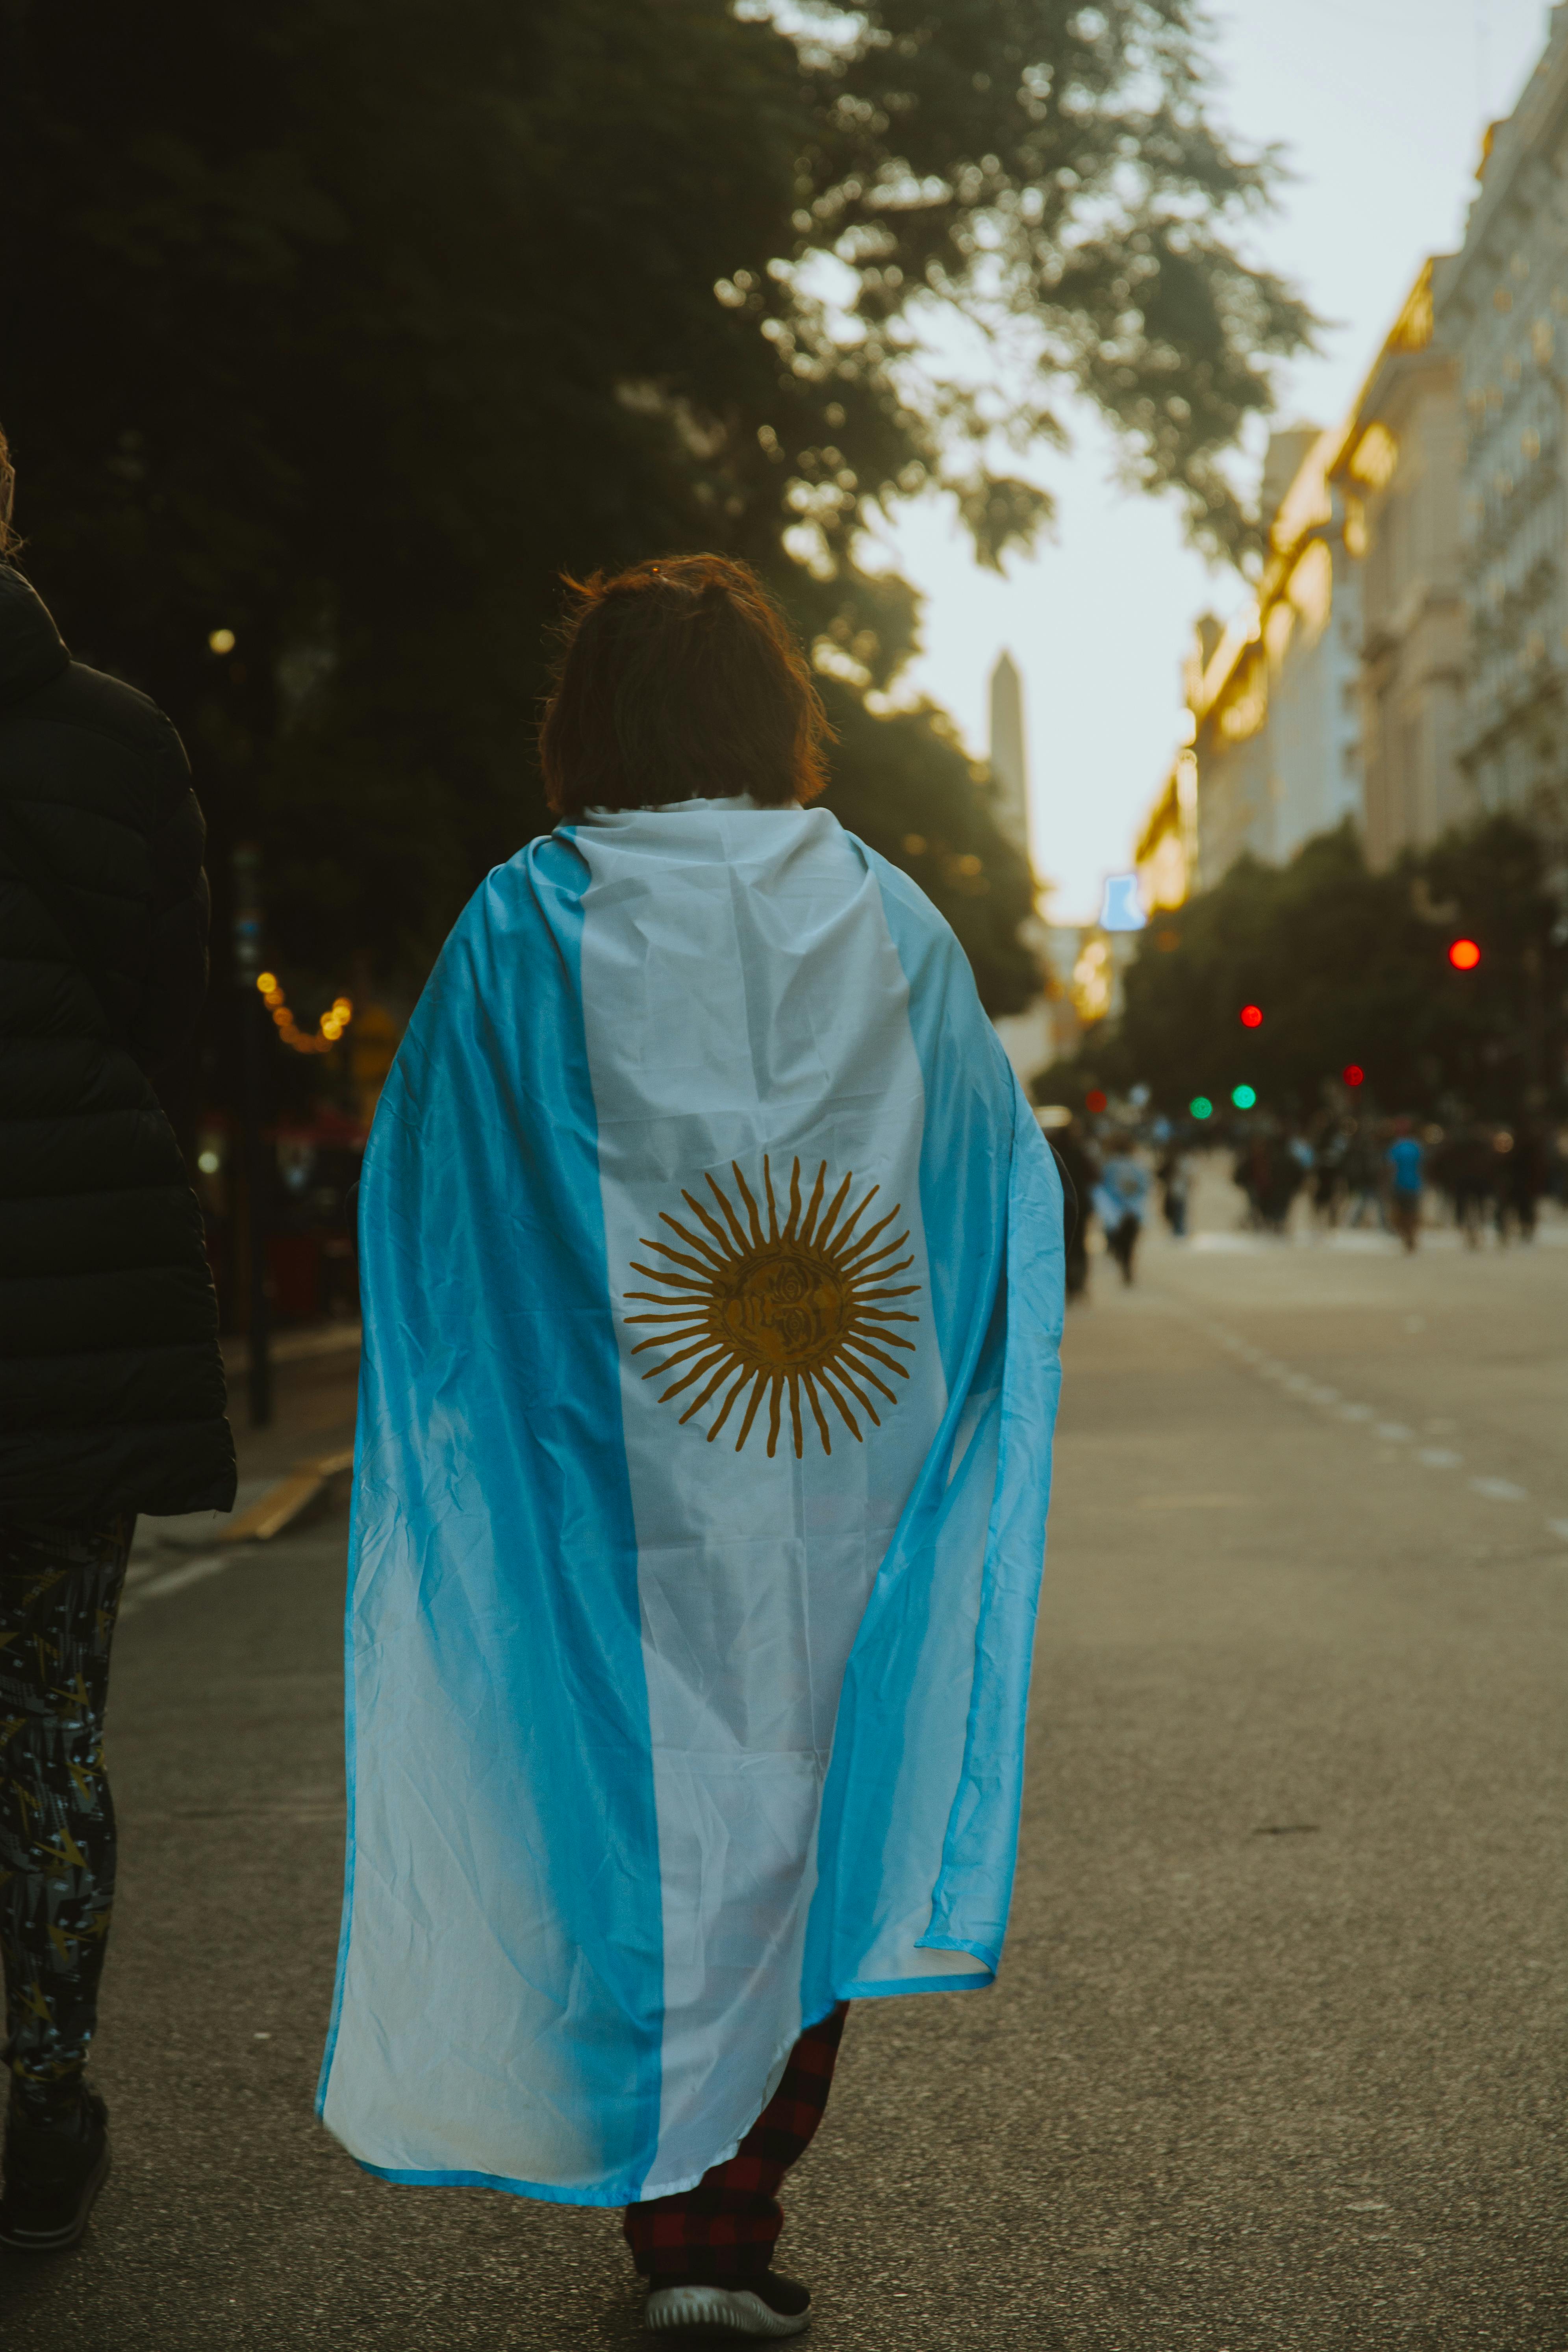 Download Free Bandera Argentina Pictures [HD]